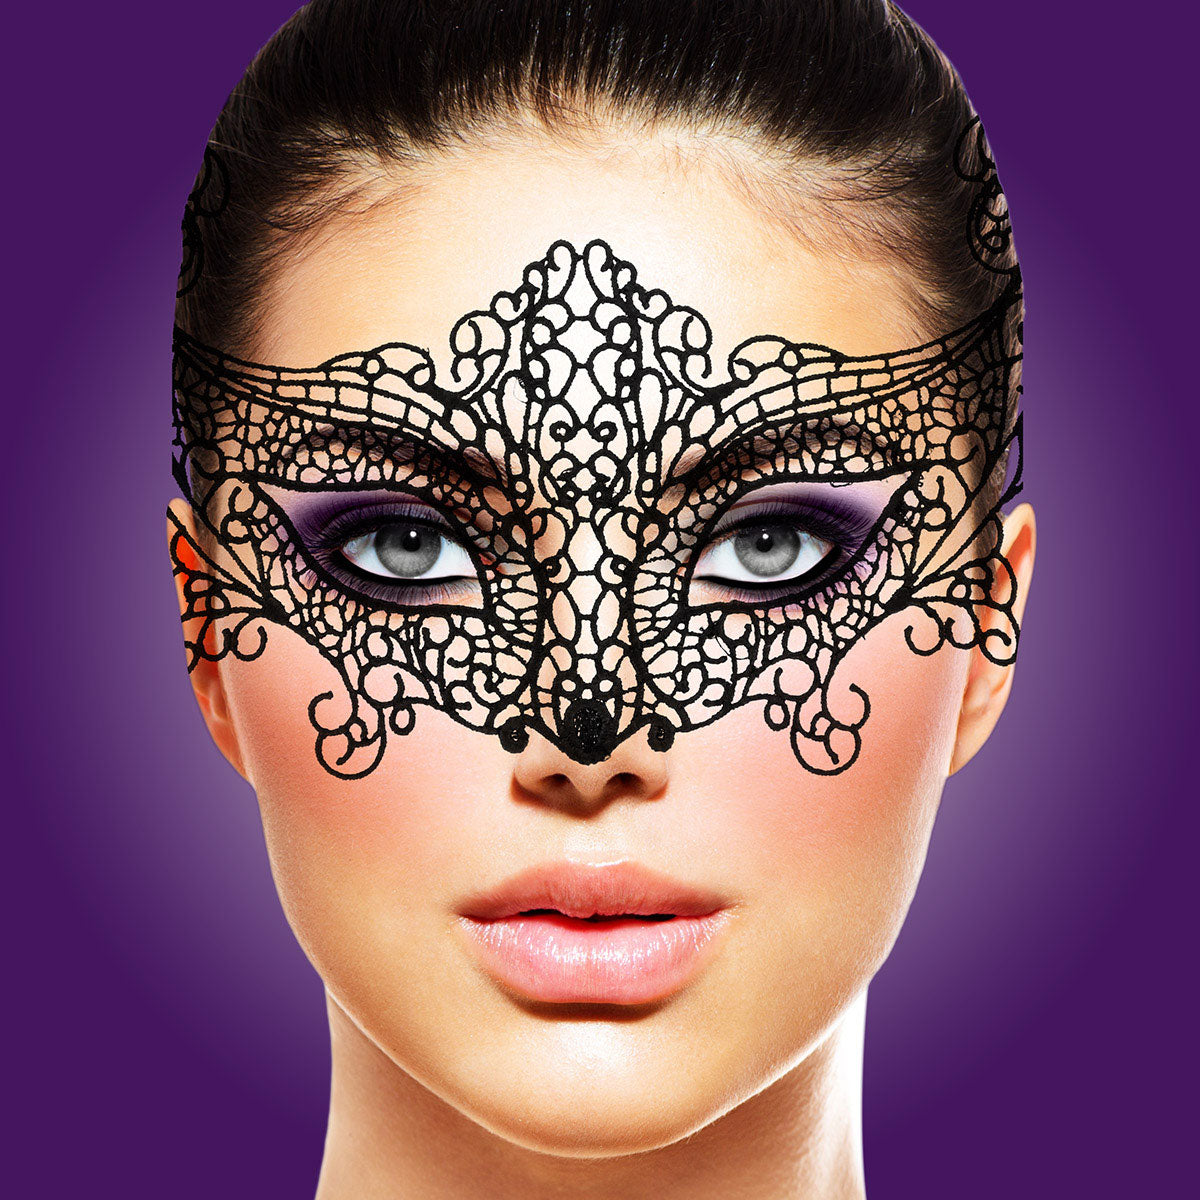 RIanne S Mask  - Assorted Styles